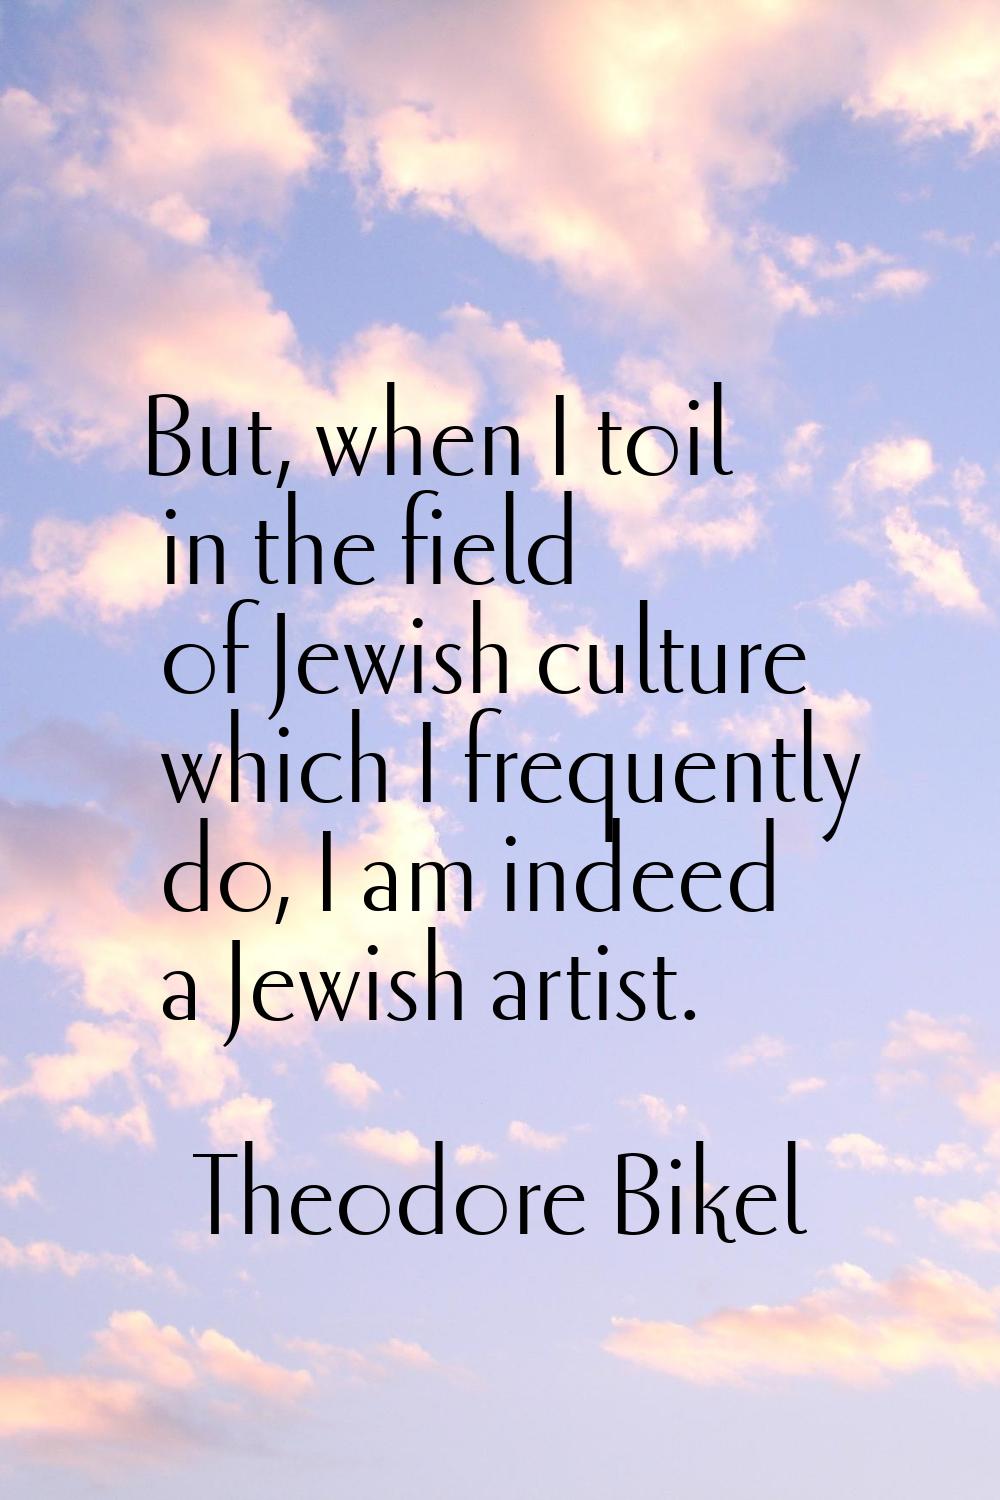 But, when I toil in the field of Jewish culture which I frequently do, I am indeed a Jewish artist.